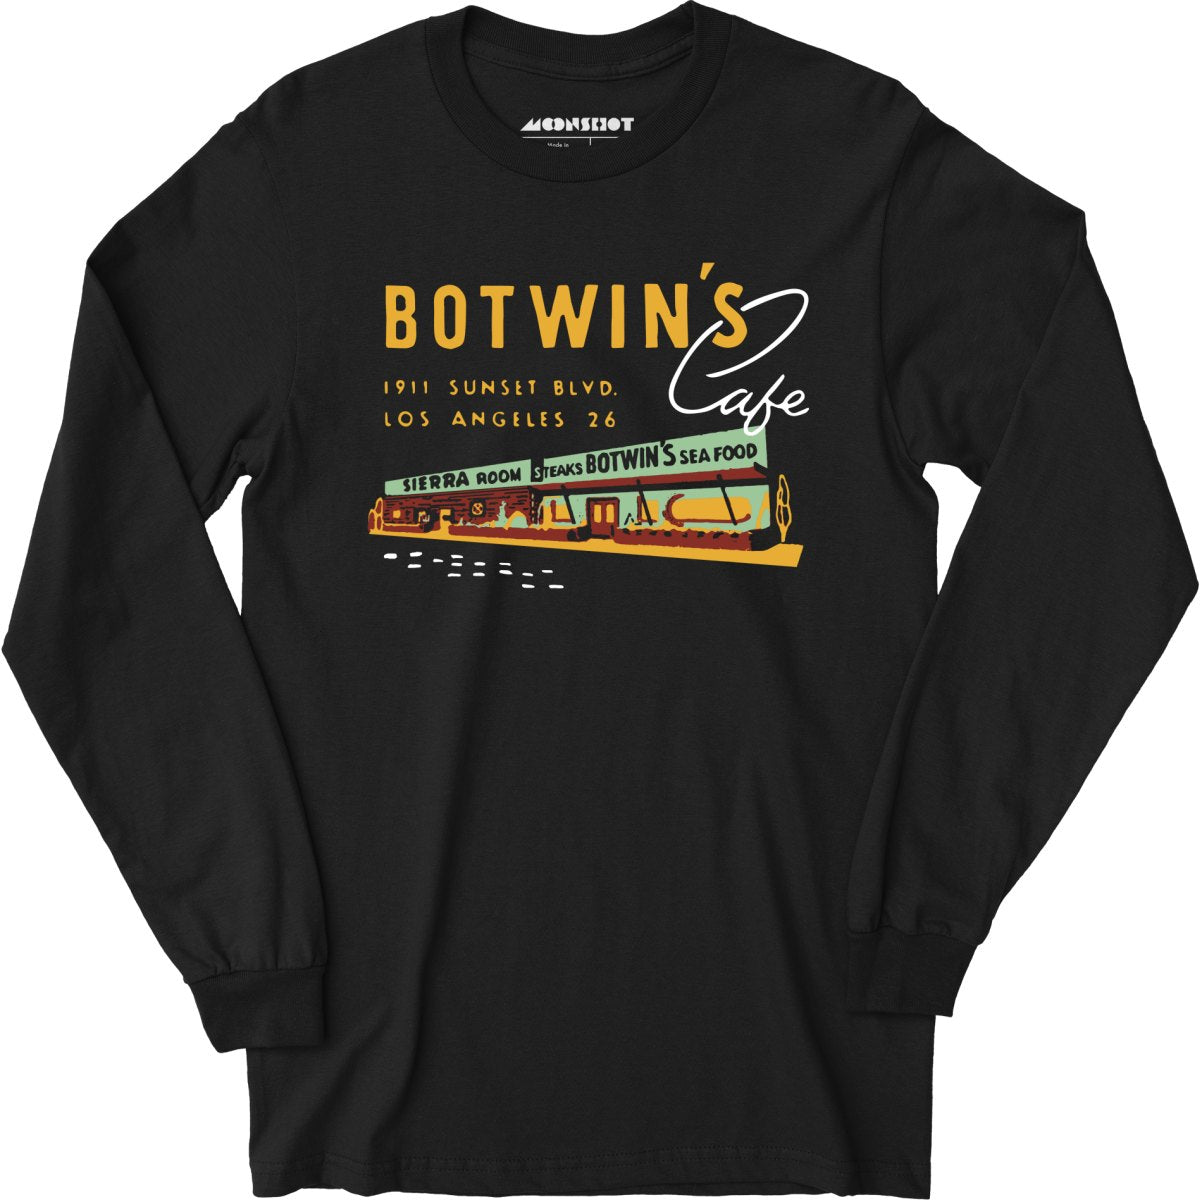 Botwin's Cafe - Los Angeles, CA - Vintage Restaurant - Long Sleeve T-Shirt